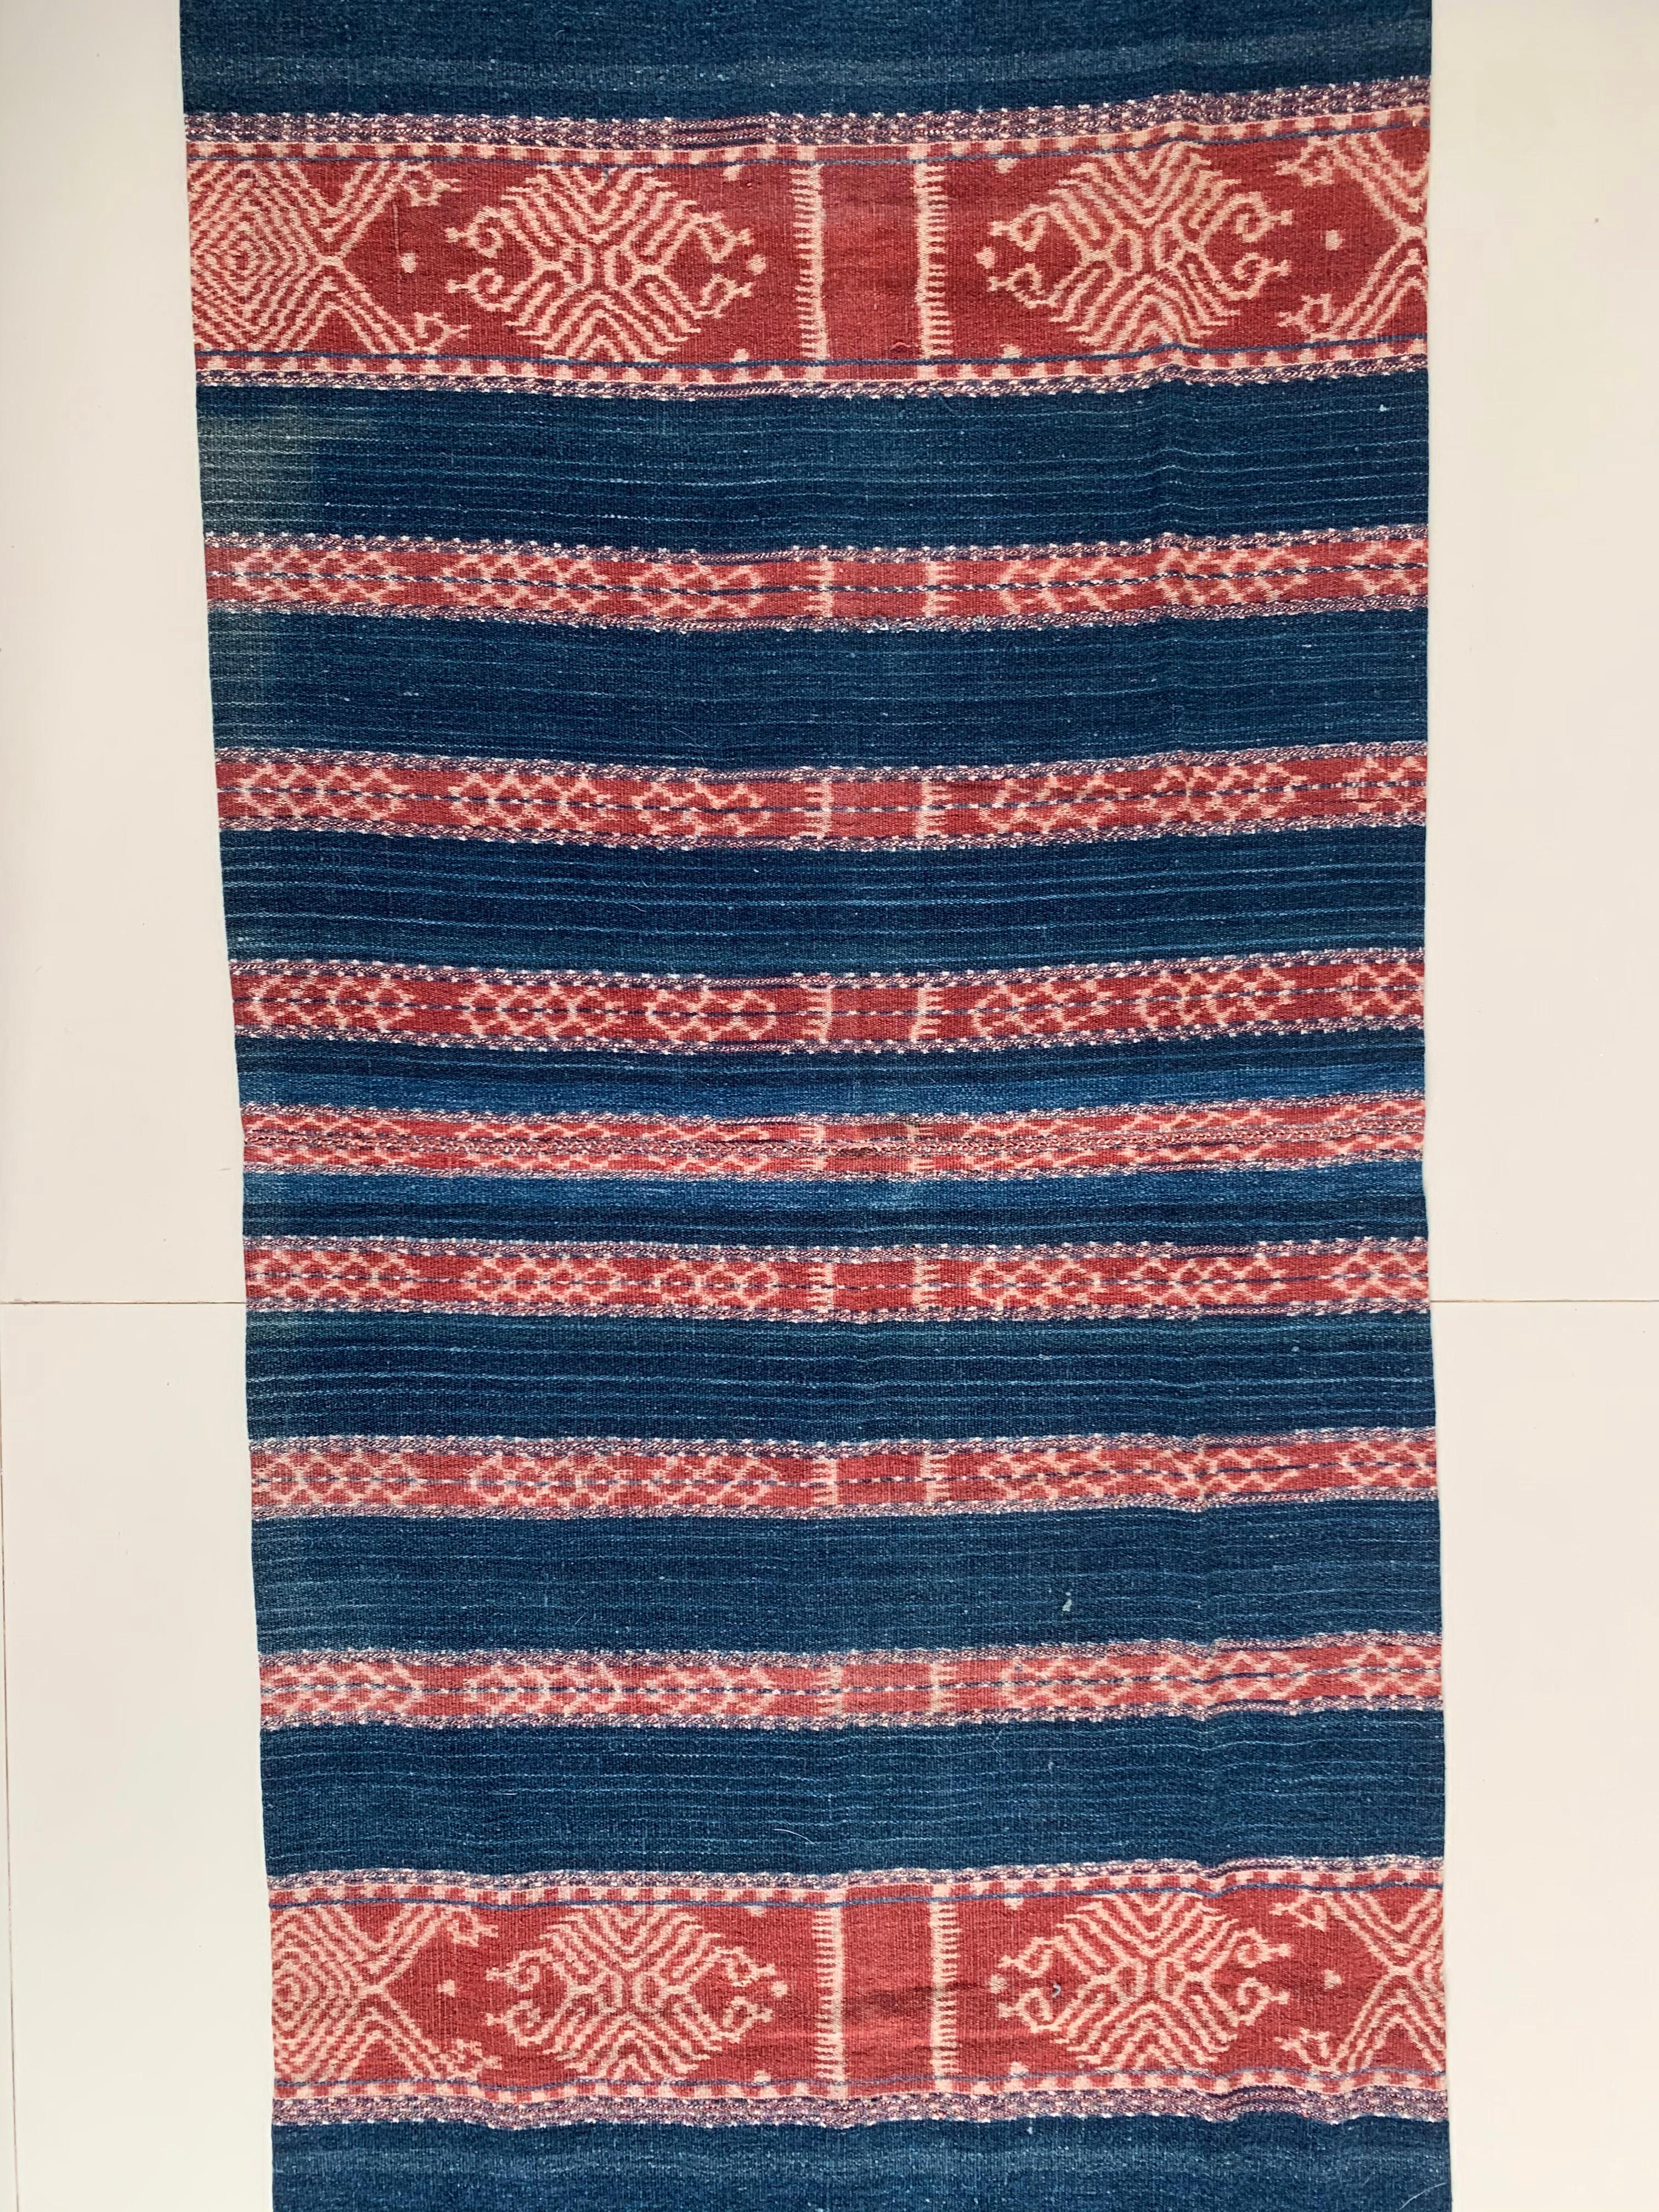 This Ikat textile originates from the Island of Timor, Indonesia. It is hand-woven using naturally dyed yarns via a method passed on through generations. The blue foreground brings to life the array of coloured detailing and distinct tribal